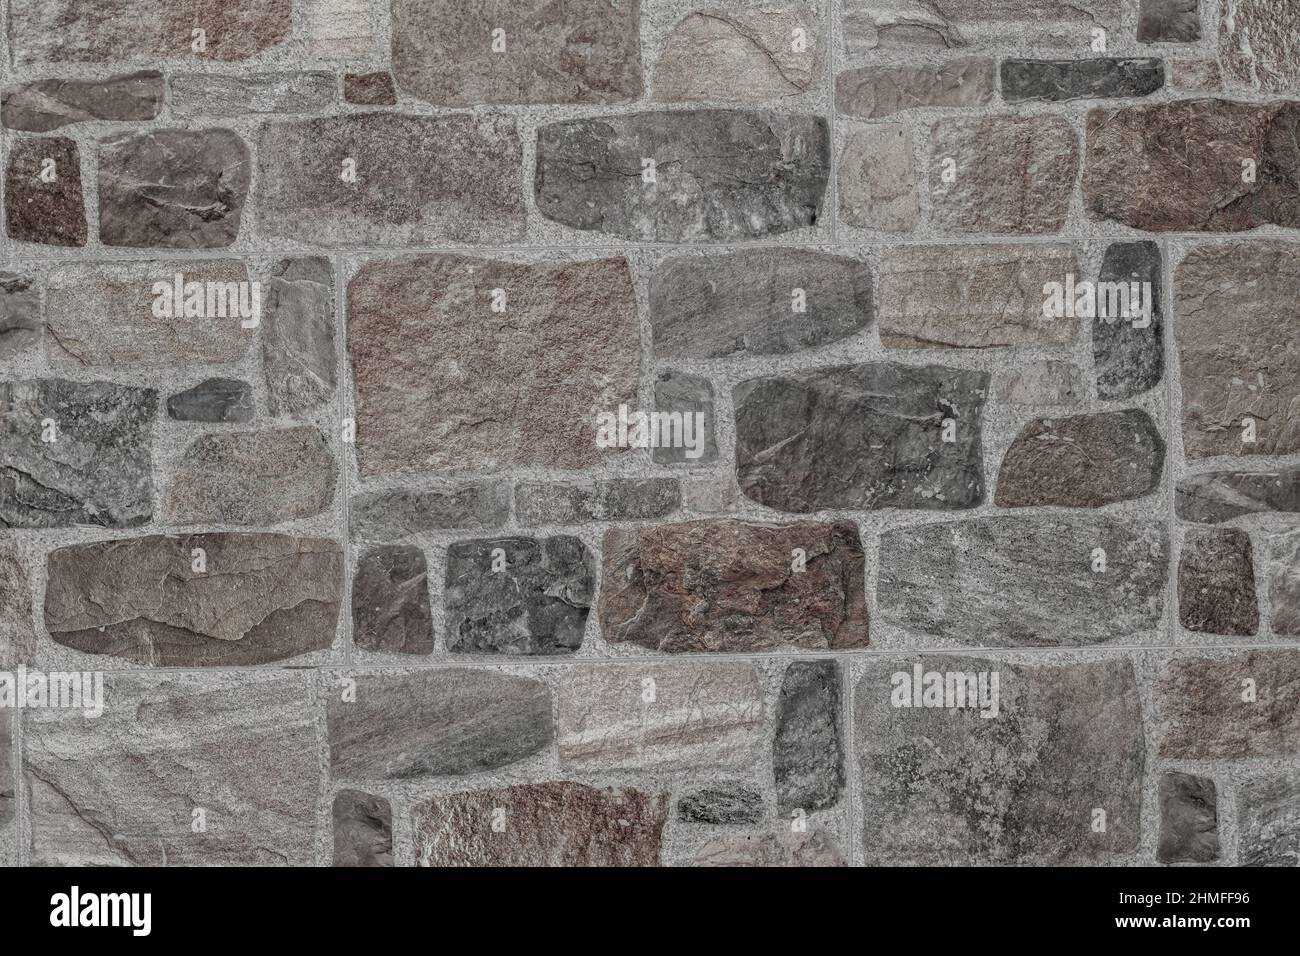 rustic and aged wallstone, exterior wall Stock Photo